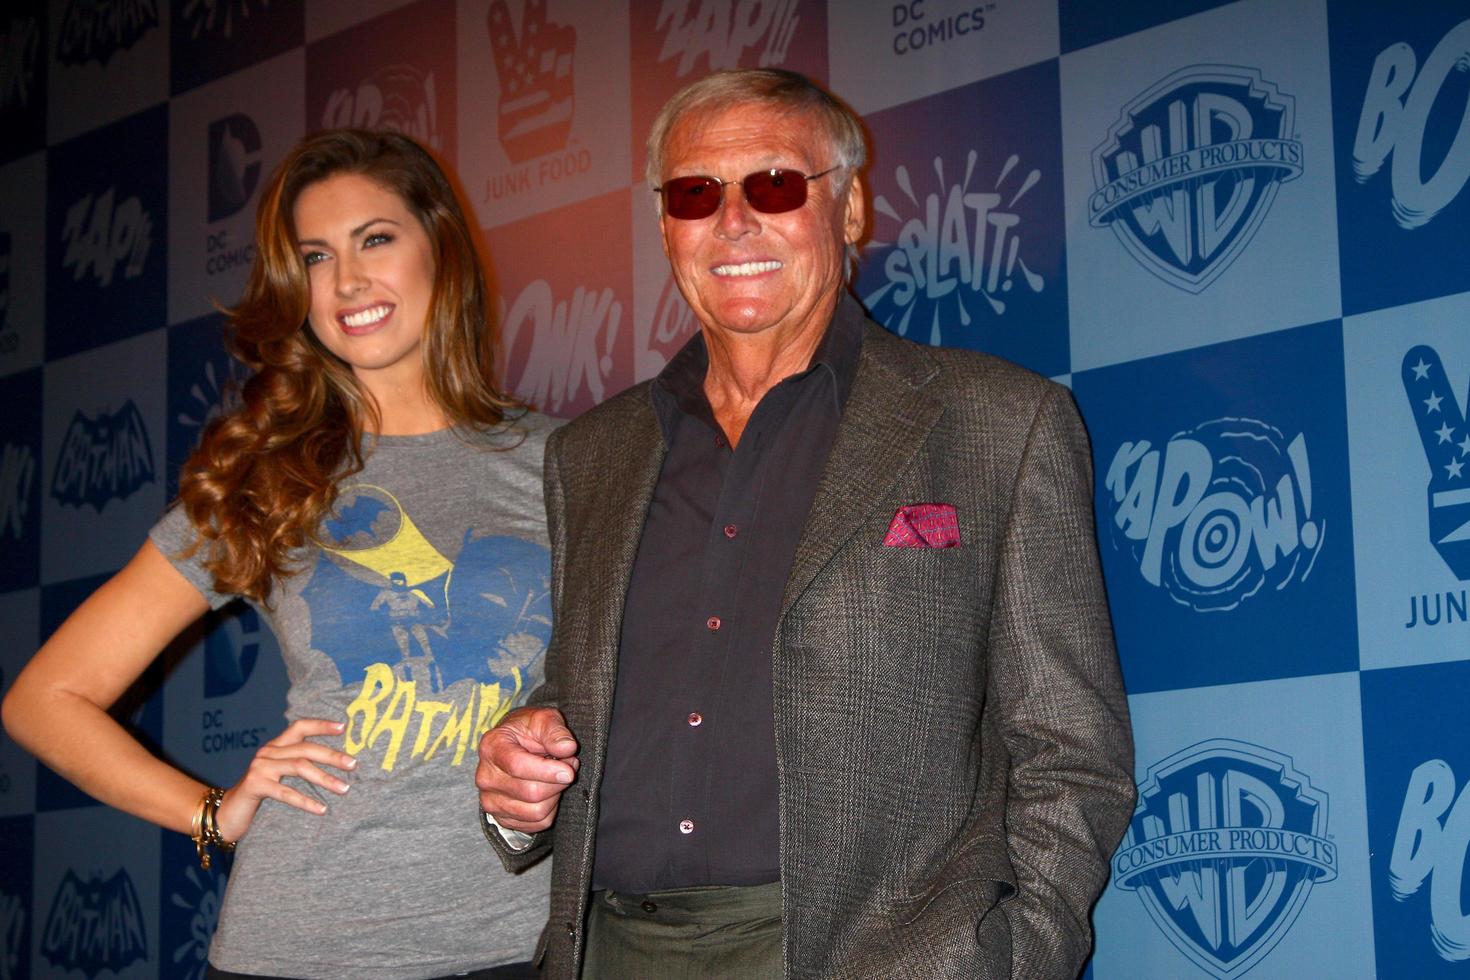 LOS ANGELES, MAR 21 -  Katherine Webb, Adam West arrive at the Batman Product Line Launch at the Meltdown Comics on March 21, 2013 in Los Angeles, CA photo